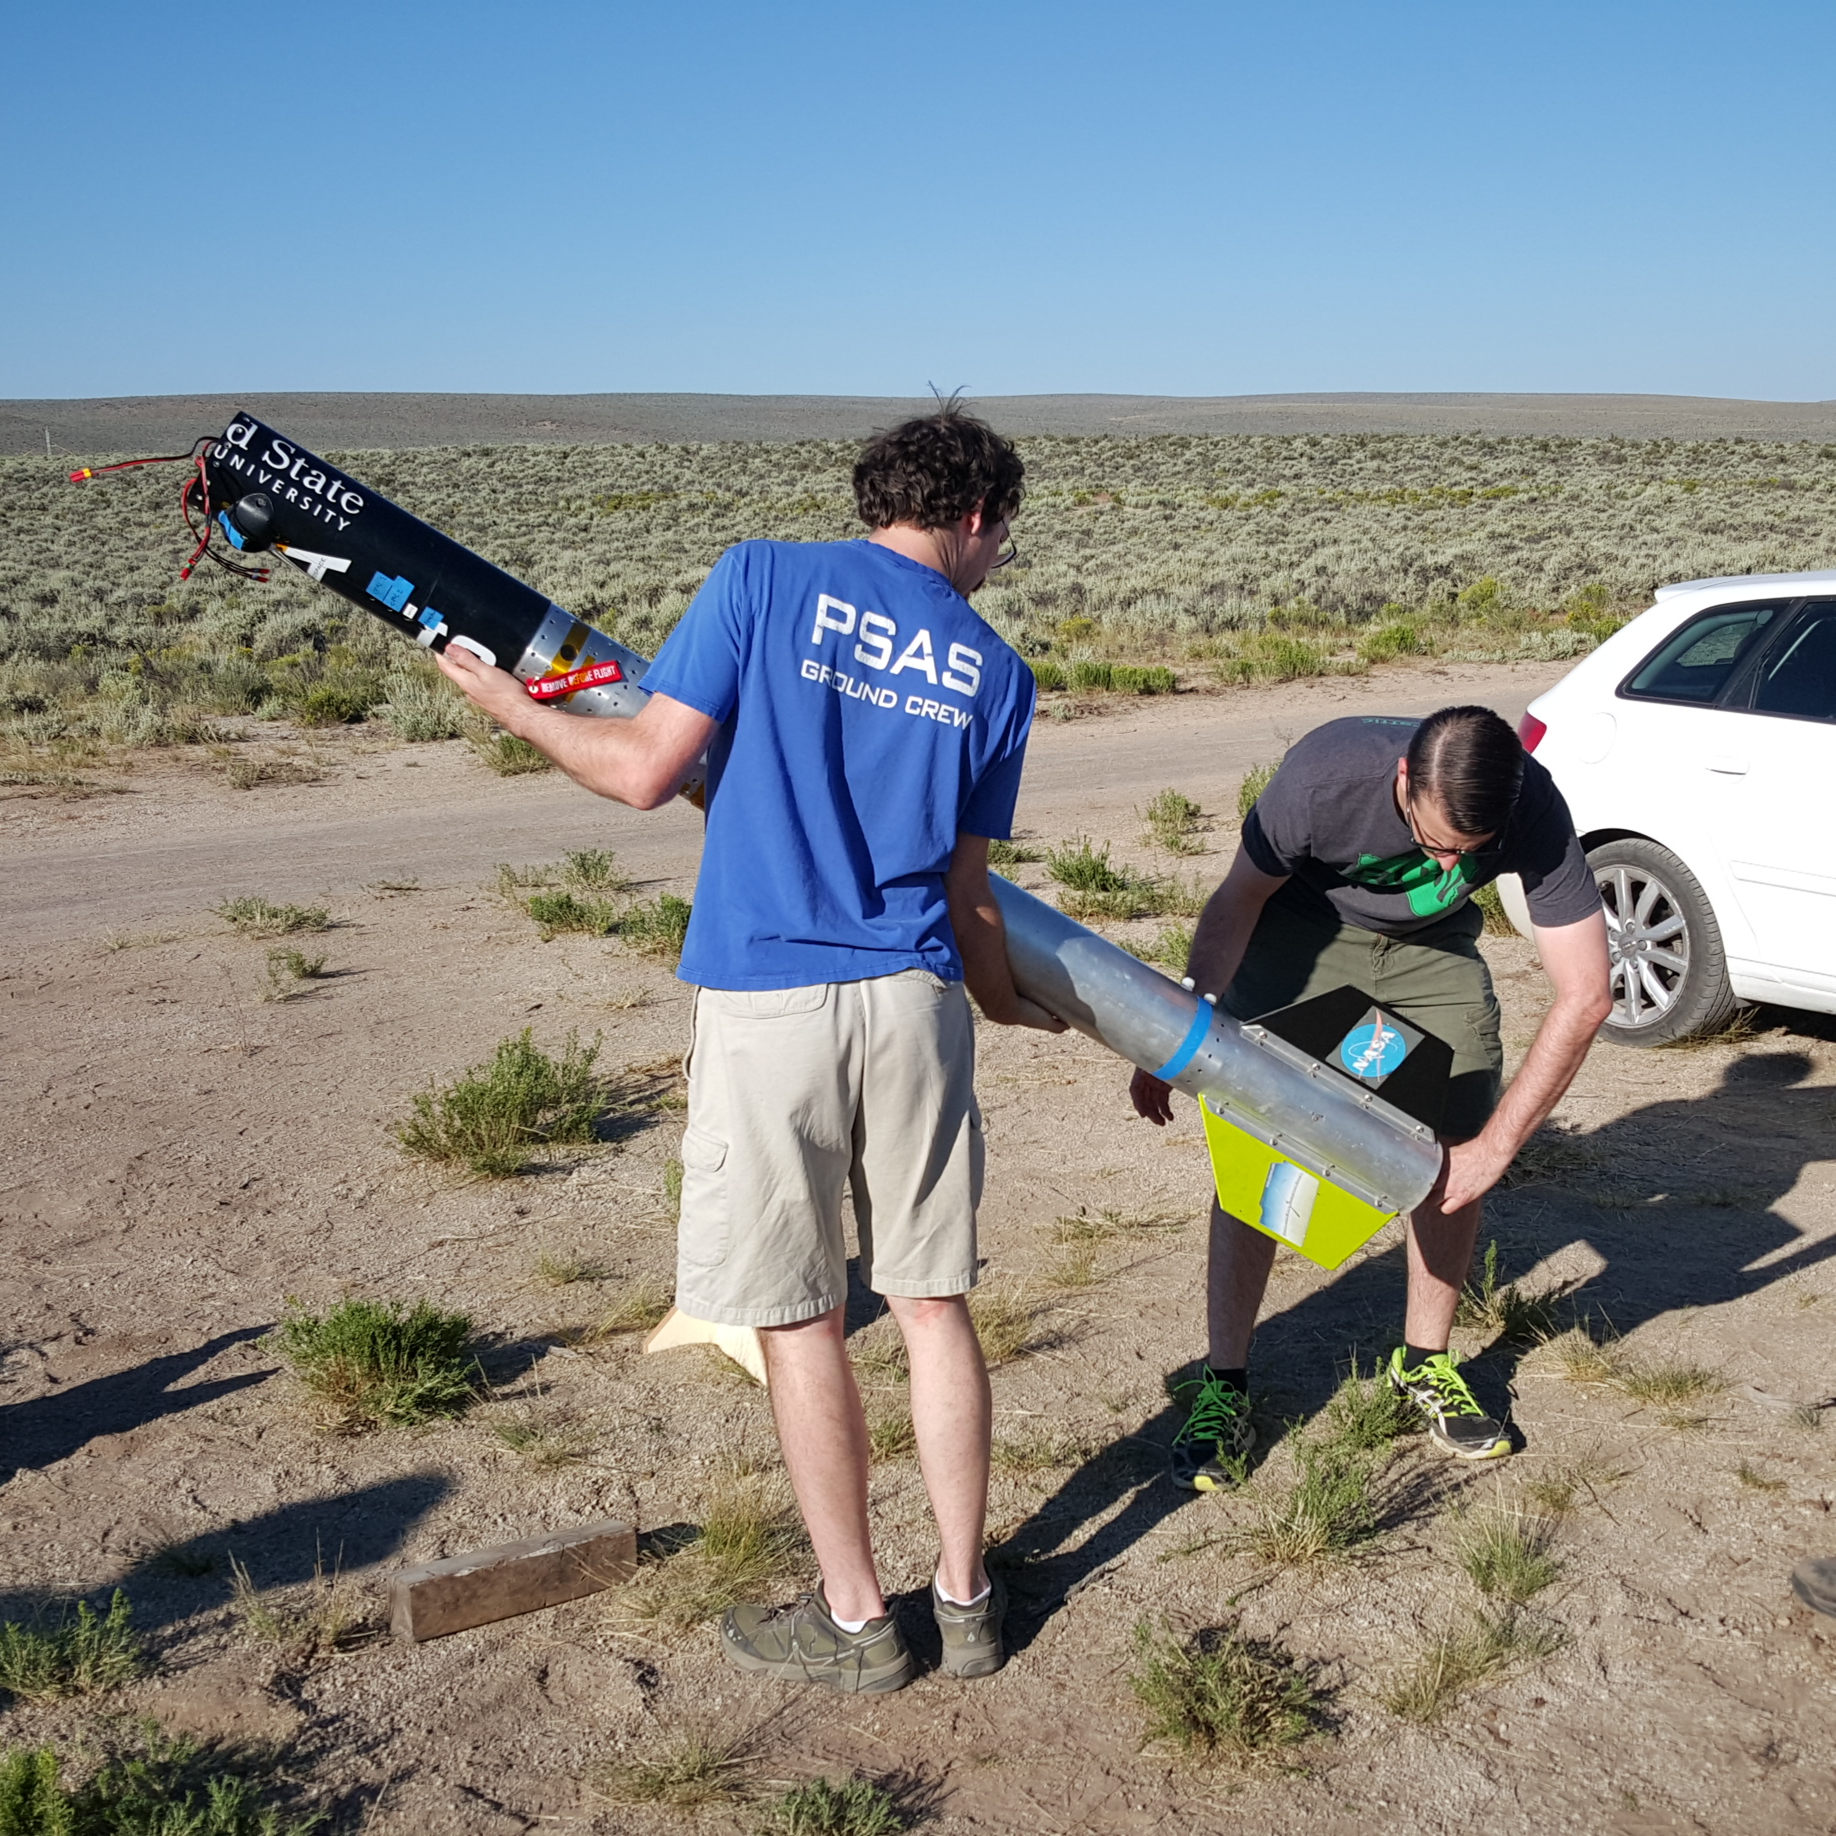 photo of two men awkwardly holding a large rocket body and an angle